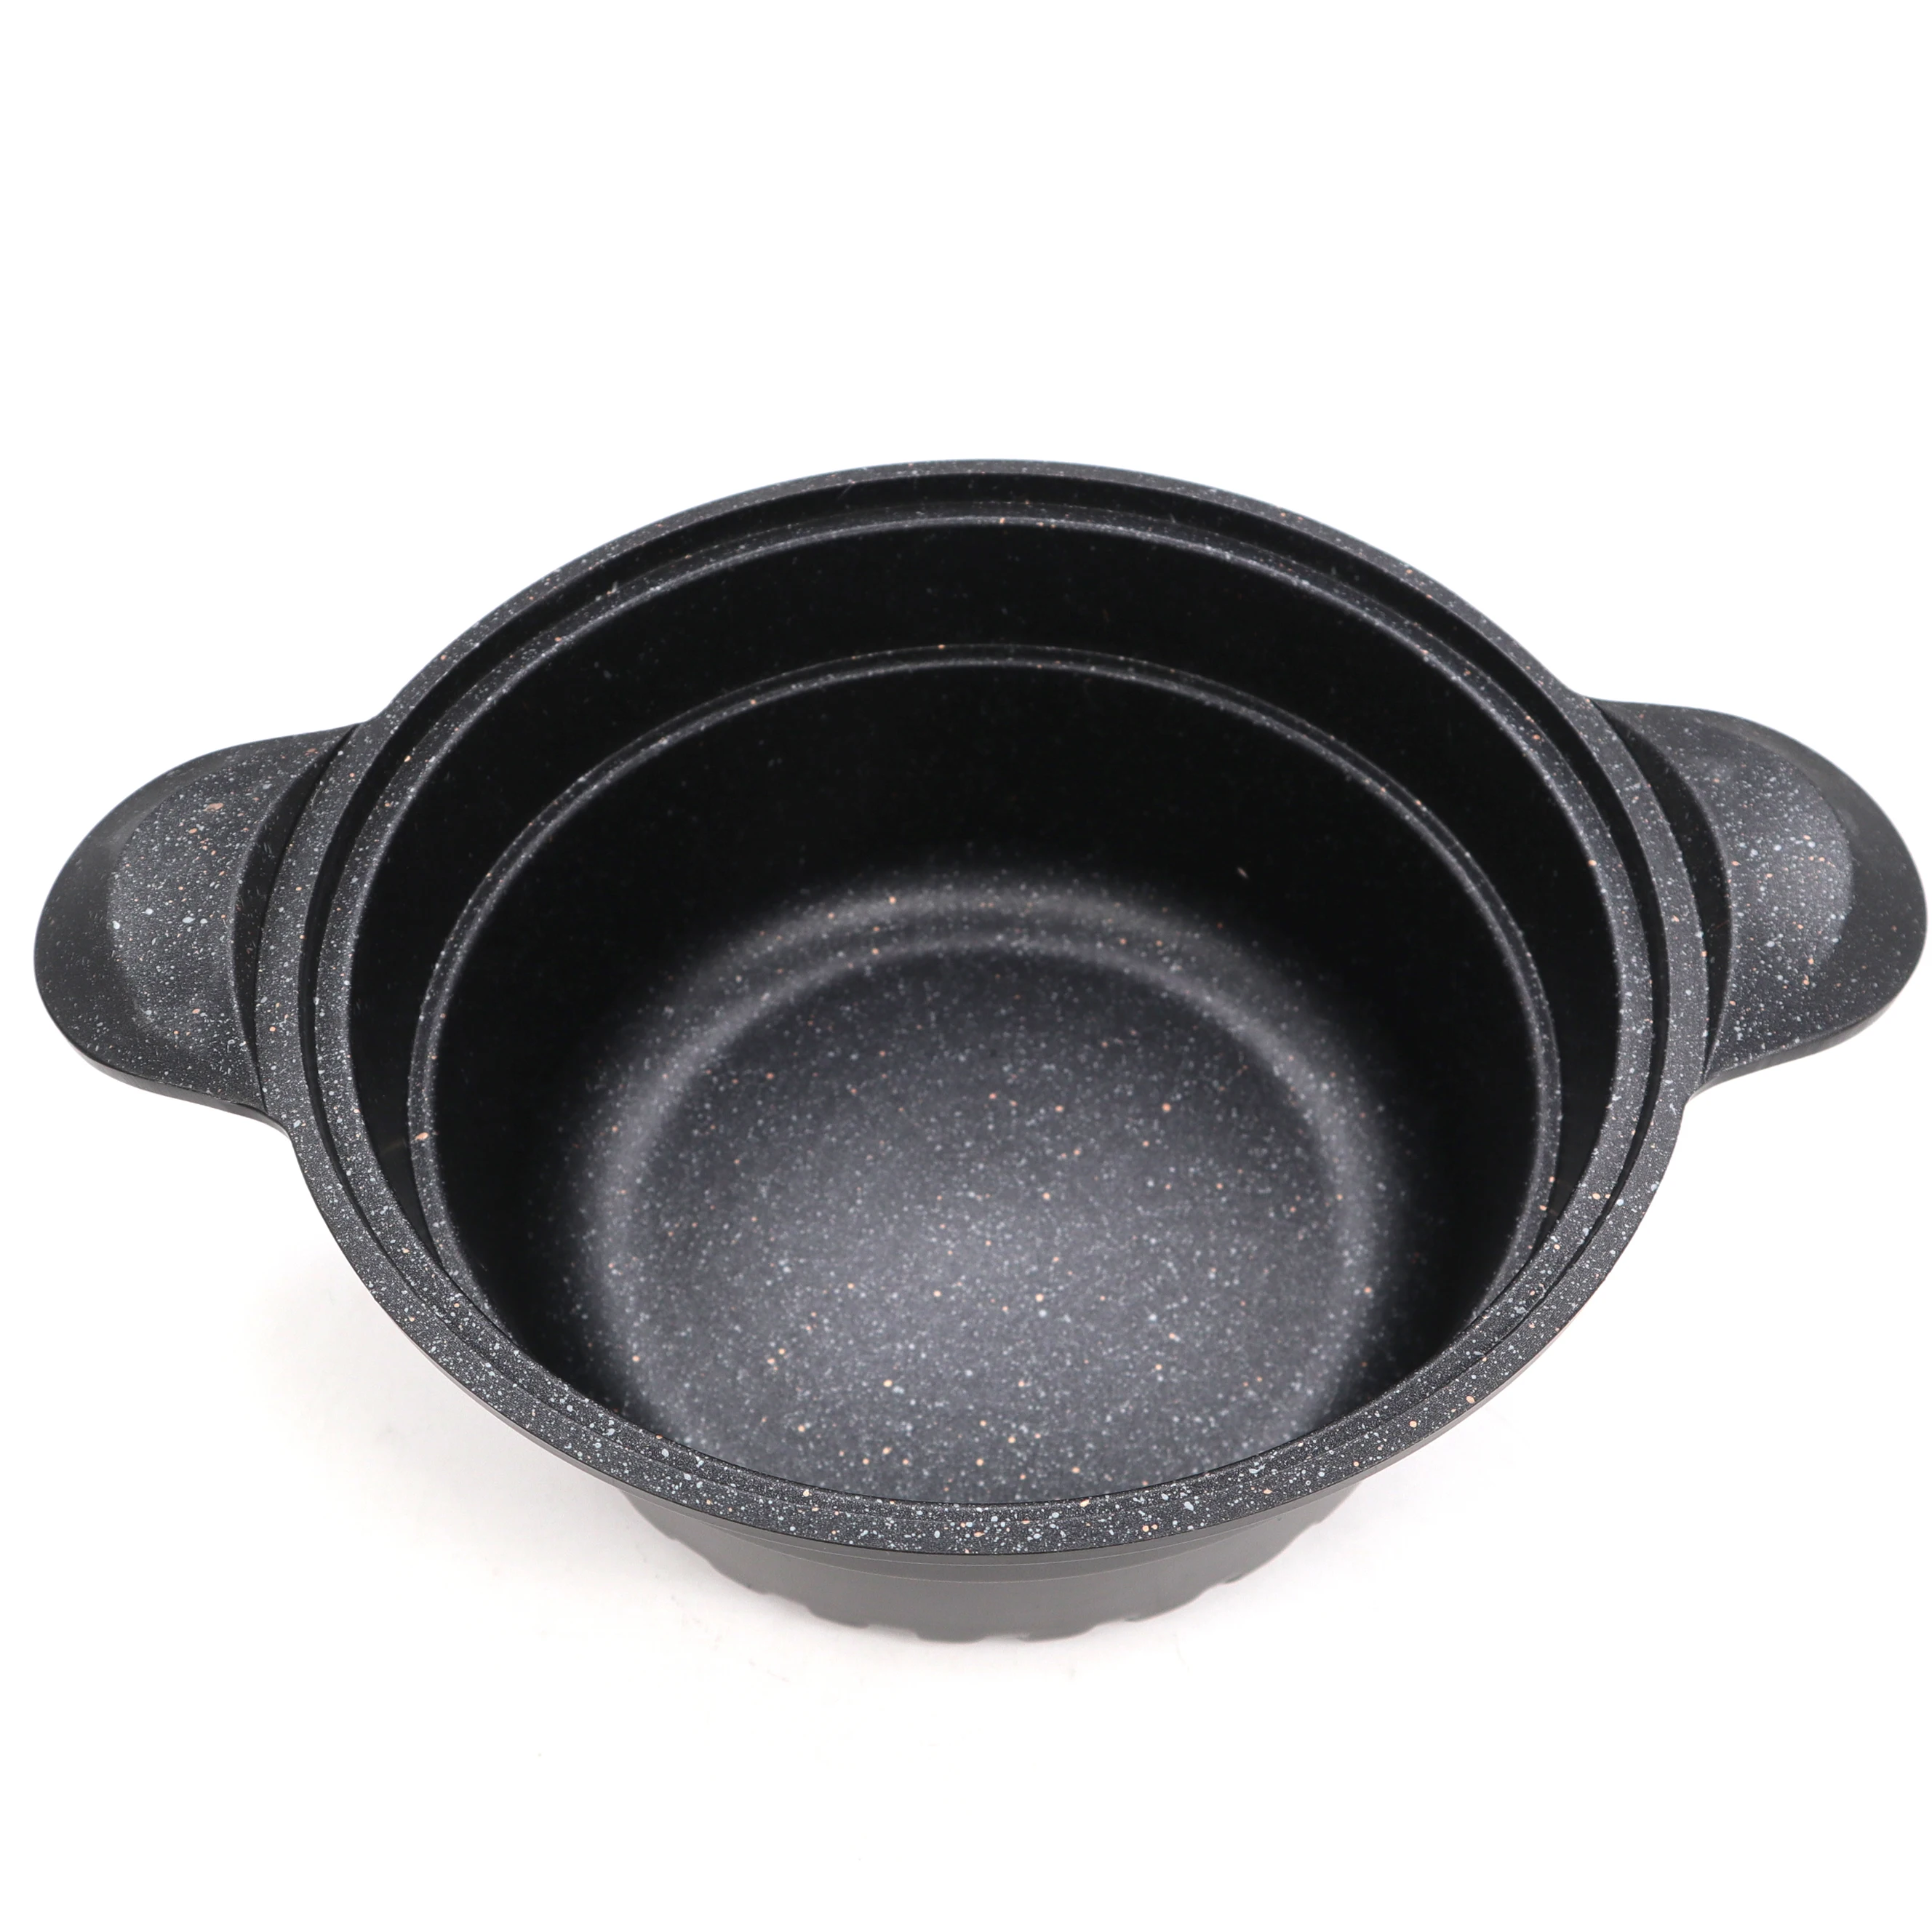 https://ae01.alicdn.com/kf/S41b06c4fa378438687f6e01f298d11b8i/Master-Star-High-Quality-Die-Casting-Sauce-Pot-With-Glass-Cover-Non-Stick-20-24-26cm.jpg